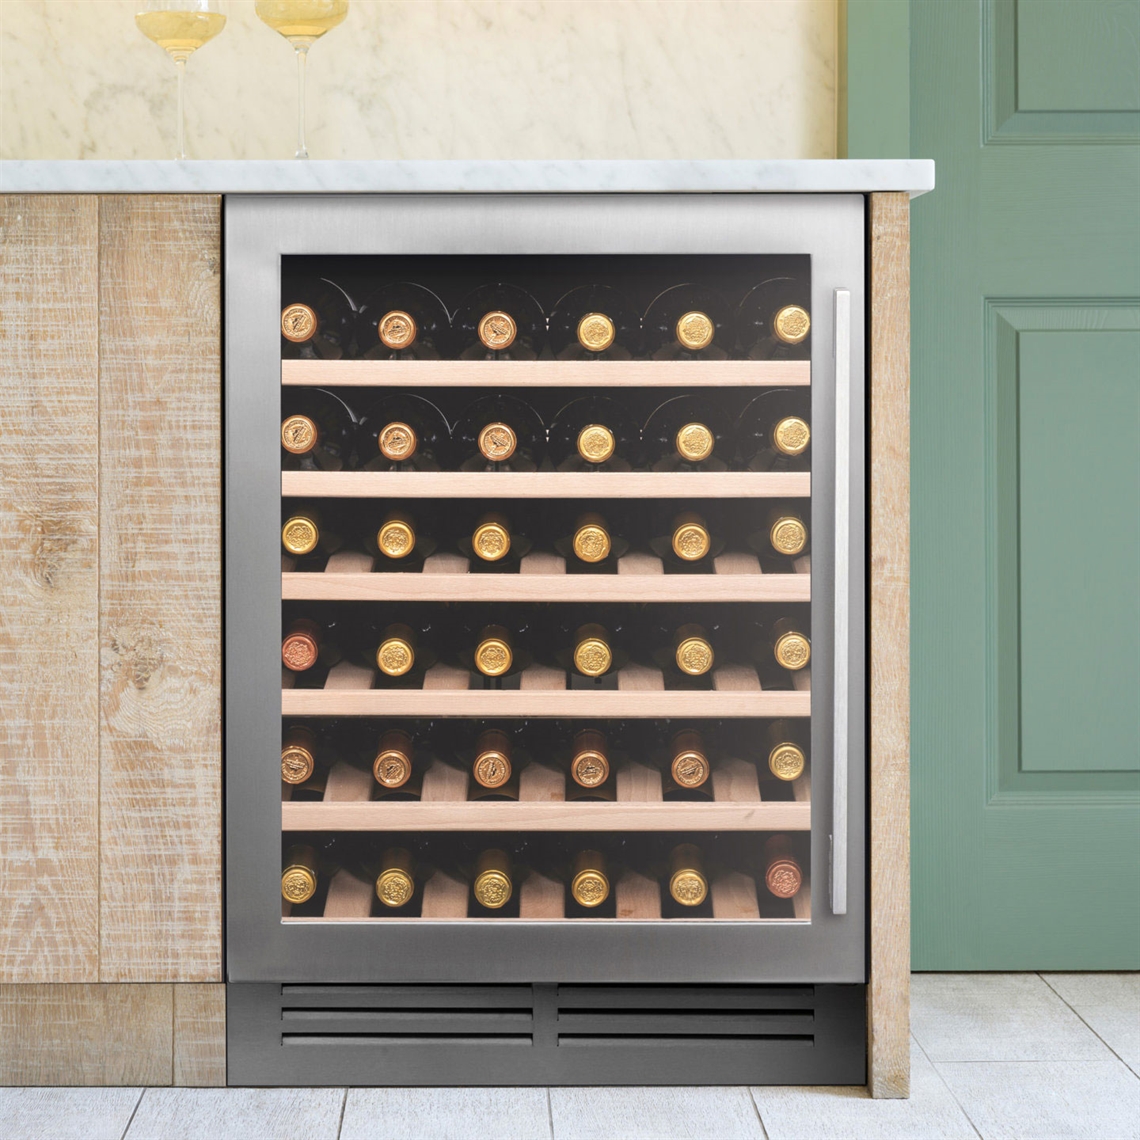 Caple Wine Cabinet Classic - Single Temperature Slot-In - Stainless Steel Wi6142